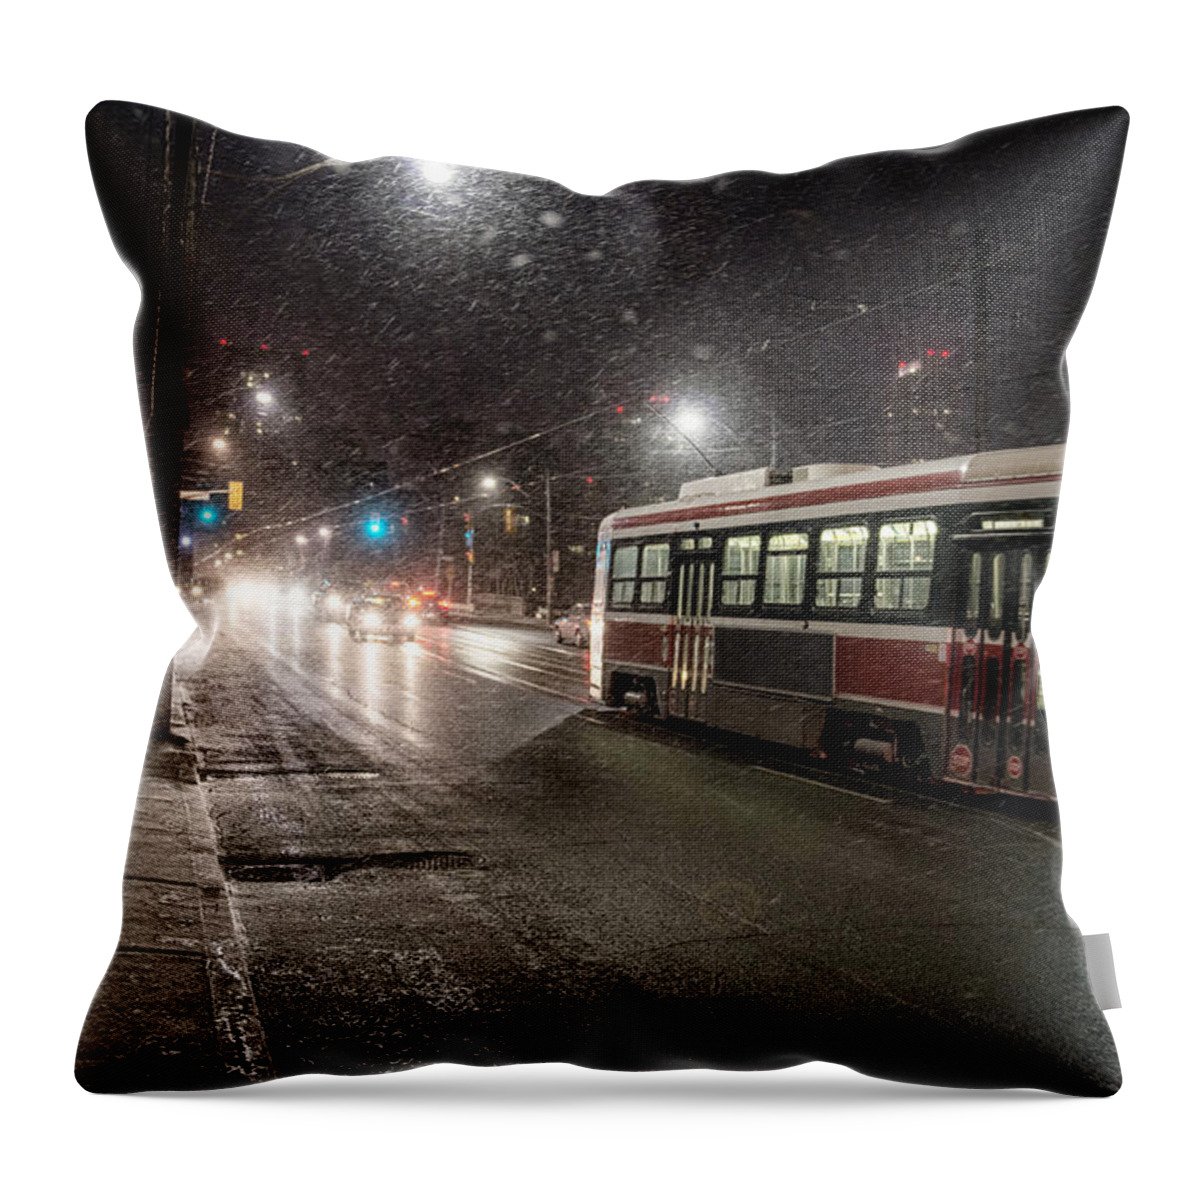 Toronto Throw Pillow featuring the photograph Streetcar In The Snow by This Image